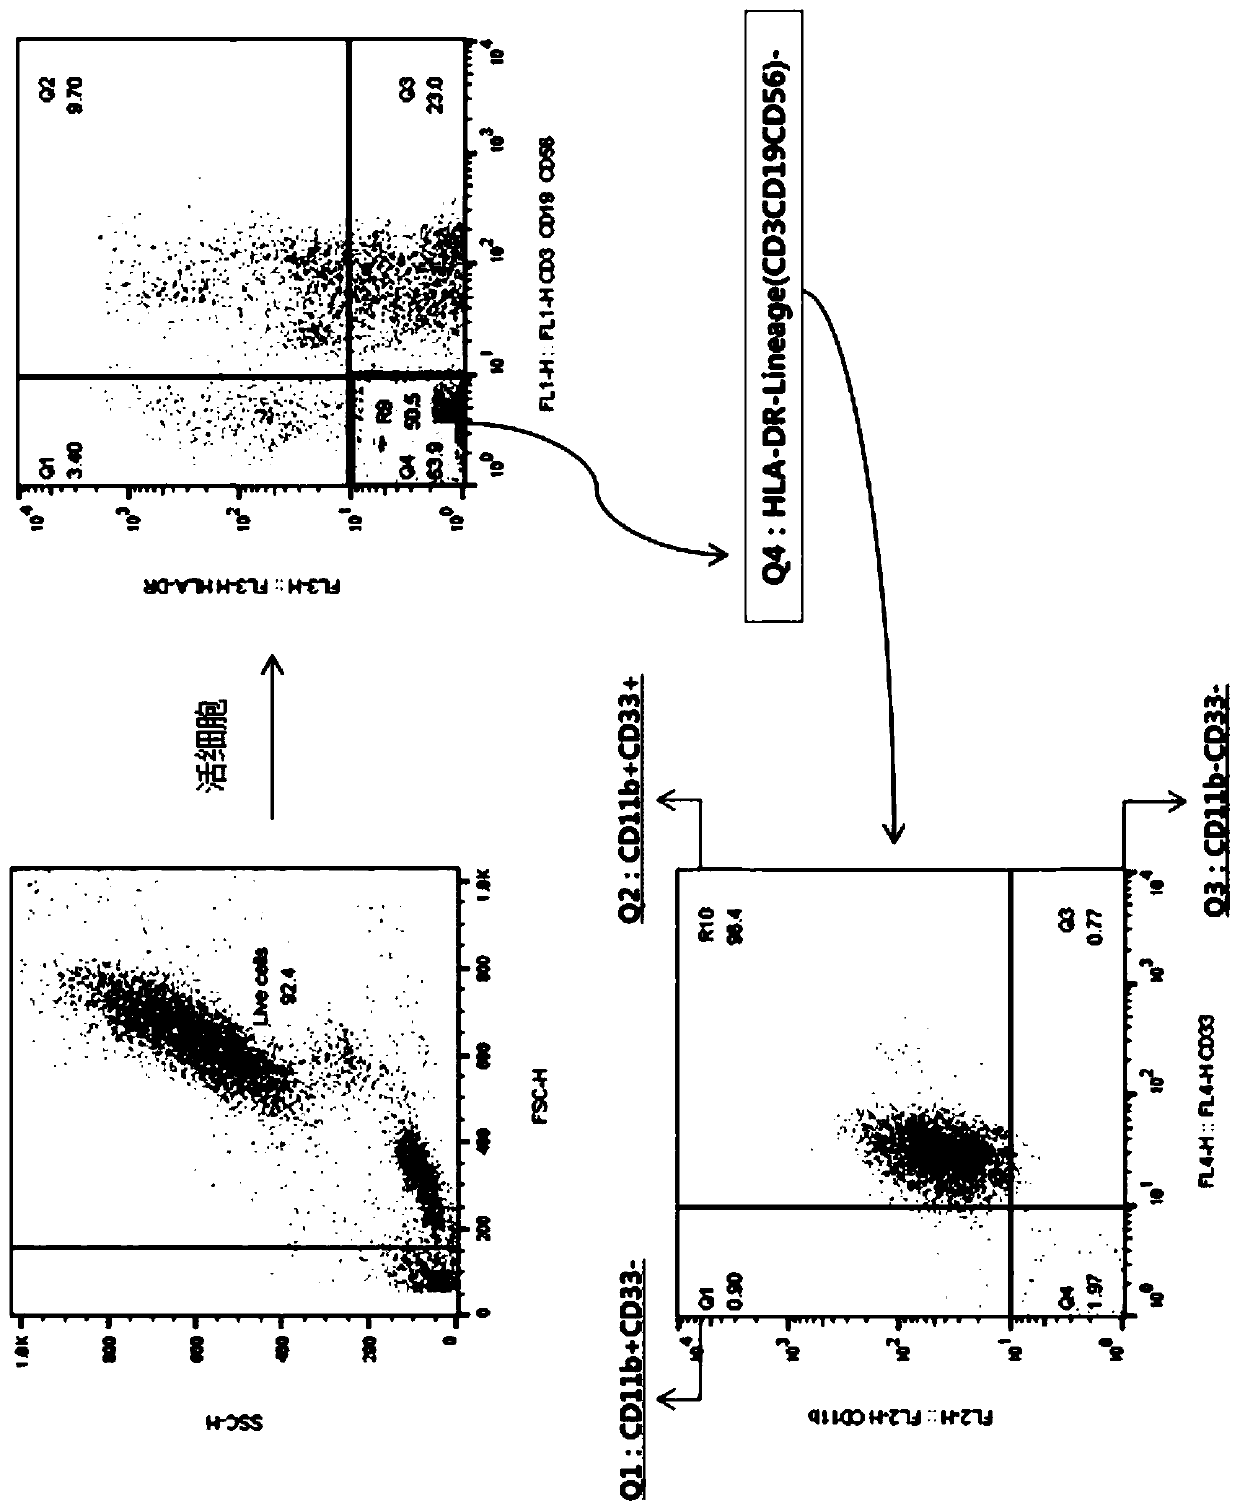 Method for assessing immunity and providing information on whether or not the onset of cancer has begun by utilizing difference in immune cell distribution between peripheral blood of colorectal cancer patient and normal person, and diagnostic kit using same